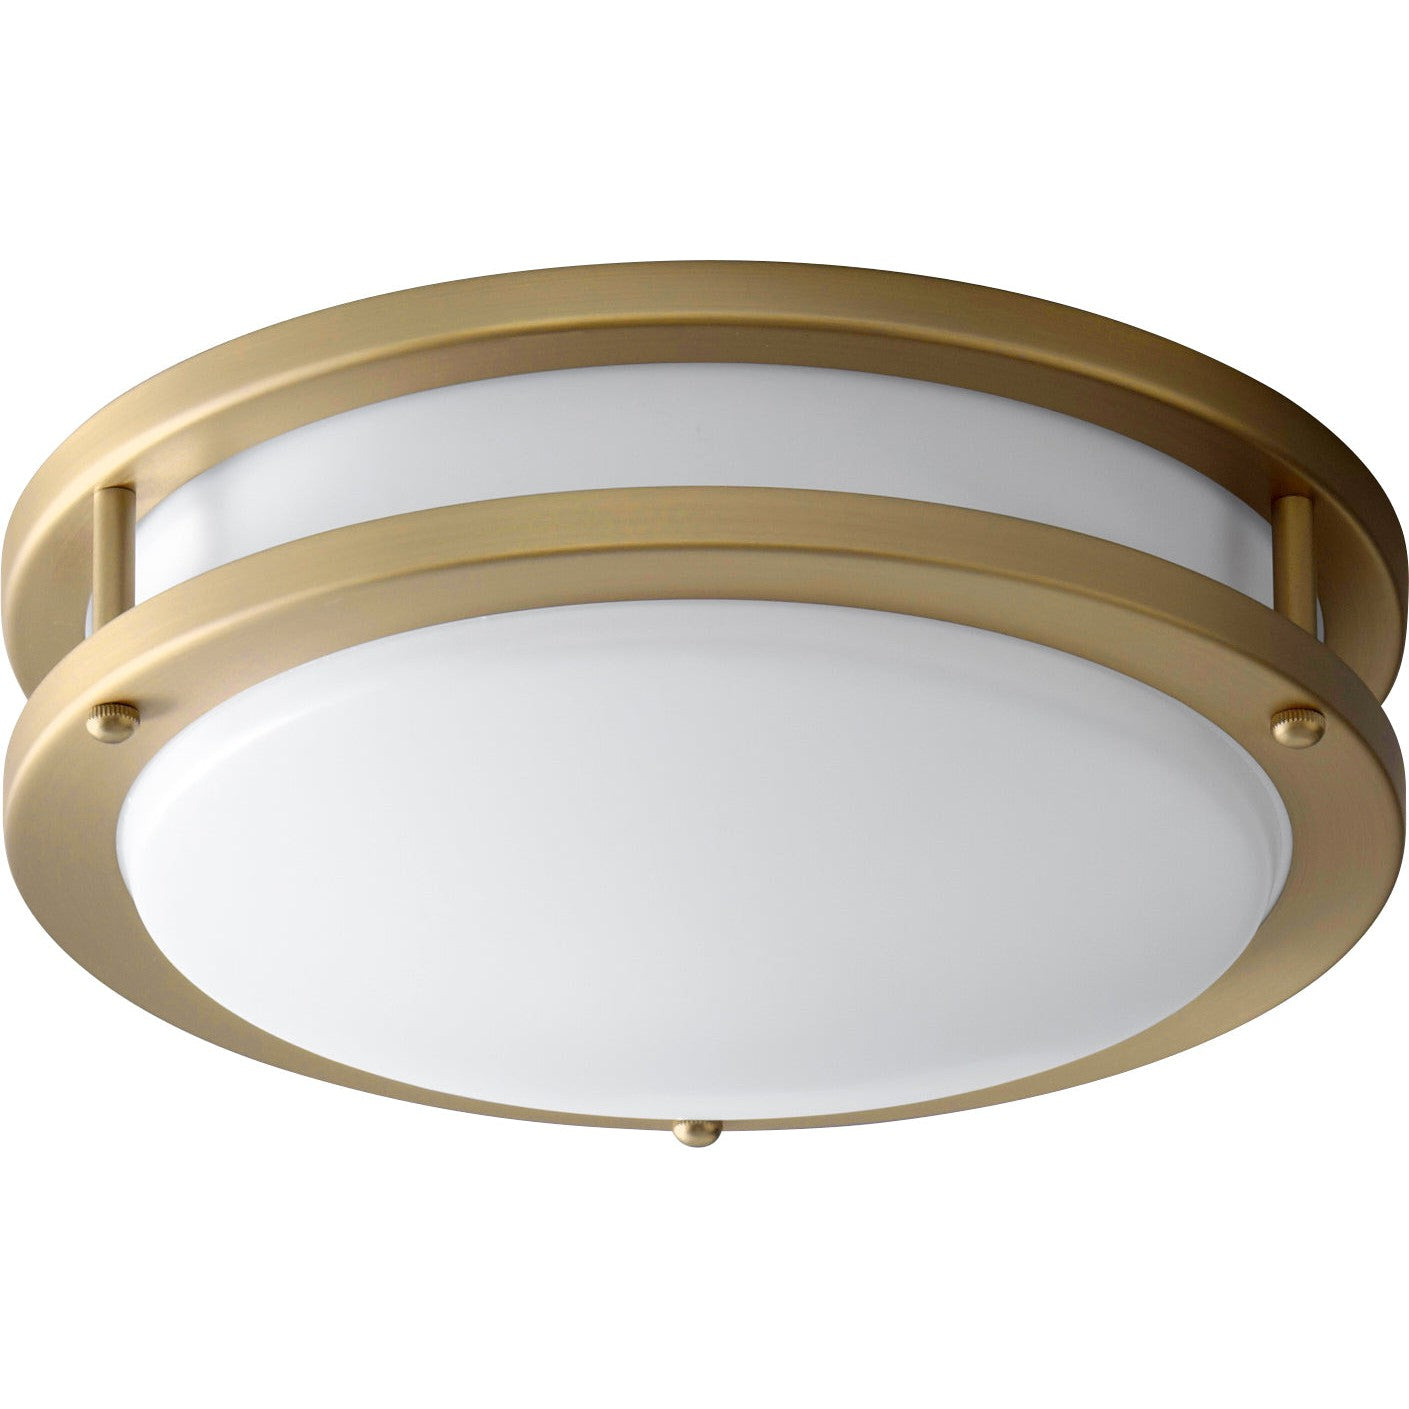 Oxygen Oracle 3-618-40 Ceiling Mount - Aged Brass